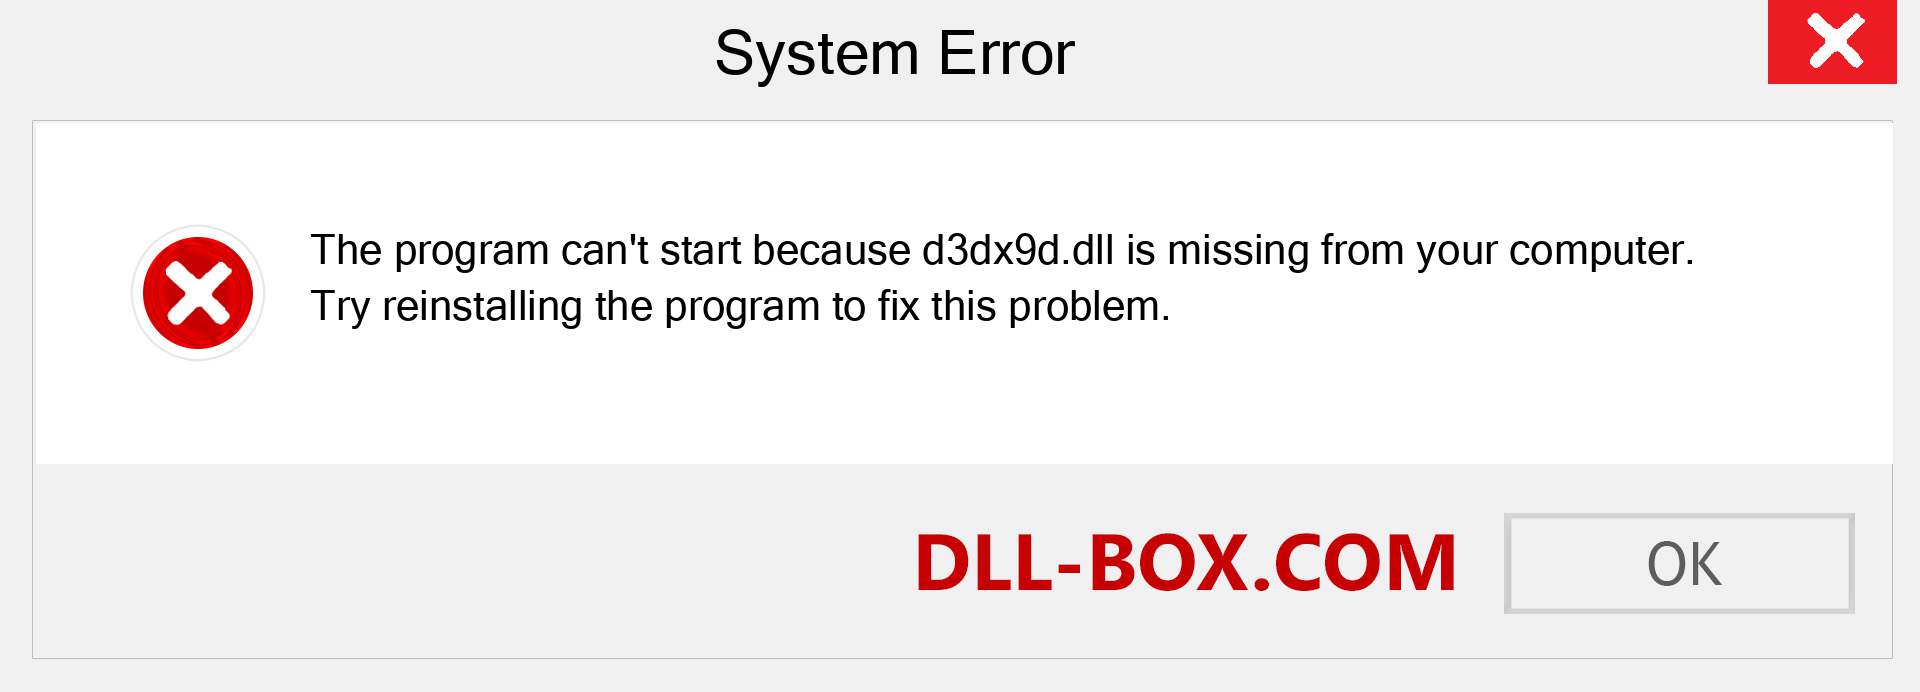  d3dx9d.dll file is missing?. Download for Windows 7, 8, 10 - Fix  d3dx9d dll Missing Error on Windows, photos, images